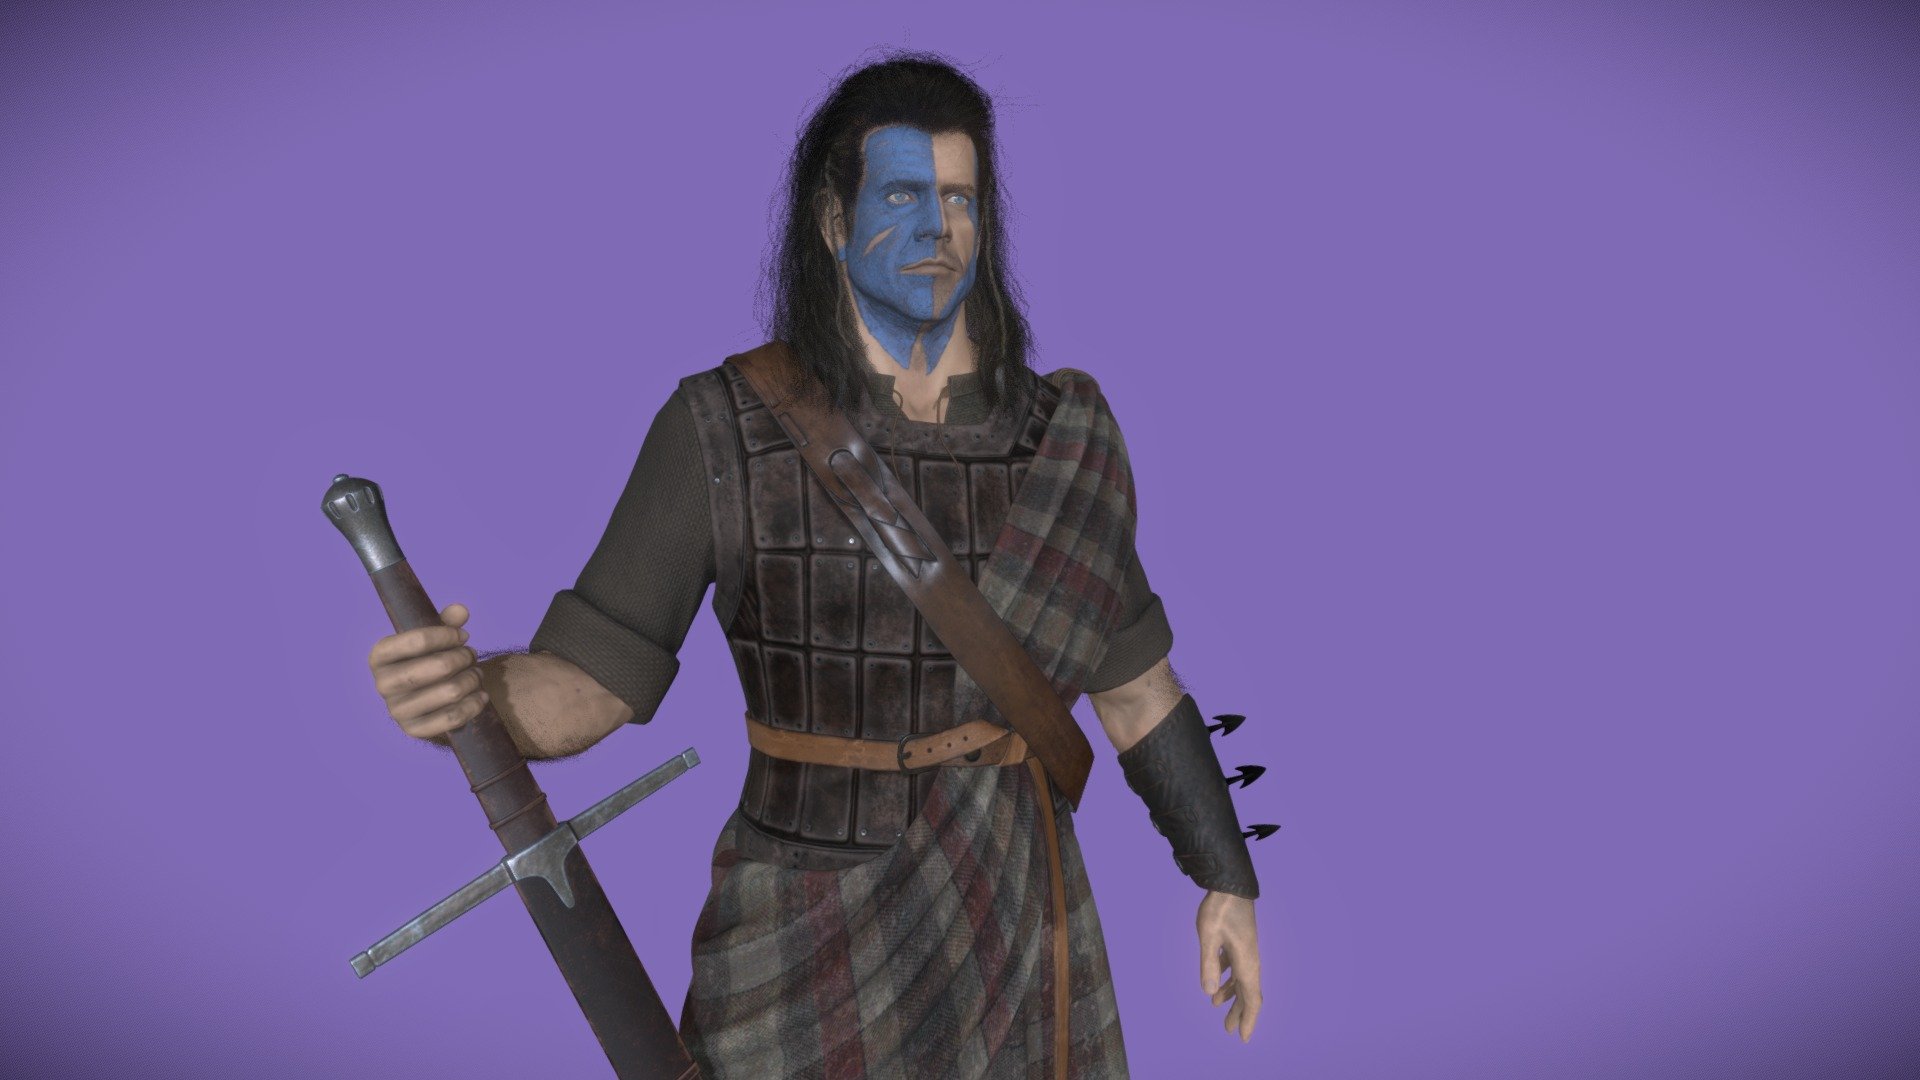 William Wallace.

Metallic Based PBR Workflow 16-Bit PNG RGBA 4K Tex Maps : Base Color / Roughness / Metallic / Ao / Specular / Normal / SSS / Opacity. 

The model was sculpted and retopologized in Blender. Texture Maps were baked and painted in Substance P. / Blender and PS

No subdivisons

&lsquo;'A'' pose is available.

File format: .blend / .fbx / .obj / .dae

9 Materials - 9 UV maps: 
TORSO / ARMS / PLAID / LEGS / SWORD / HEAD / DENTAL / EYES / HAIR.  (I split and increased some material for sketchfab version.)

Overall Tris count : 120,000

*Sword: 5,876 Tris

*Costume: 42,302 Tris

*Head: 12,162 Tris

*Legs and arms : 12,290 Tris

*Eyes: 3,008 Tris

*Tearlines: 540 Tris

*Teeth and tongue: 2,808 Tris

*Hair (of head part): 15,610 Tris

*Brows: 1,537 Tris

*Eyelashes: 1,184 Tris

*Leg and arm hair: 22,683 Tris

Head part has got two kind of texture maps : With war paint and without war paint.

FREEEDOOOOM!!! - William WALLACE - 3D model by Taygun Gencosmanoğlu (@taygungencosman) 3d model